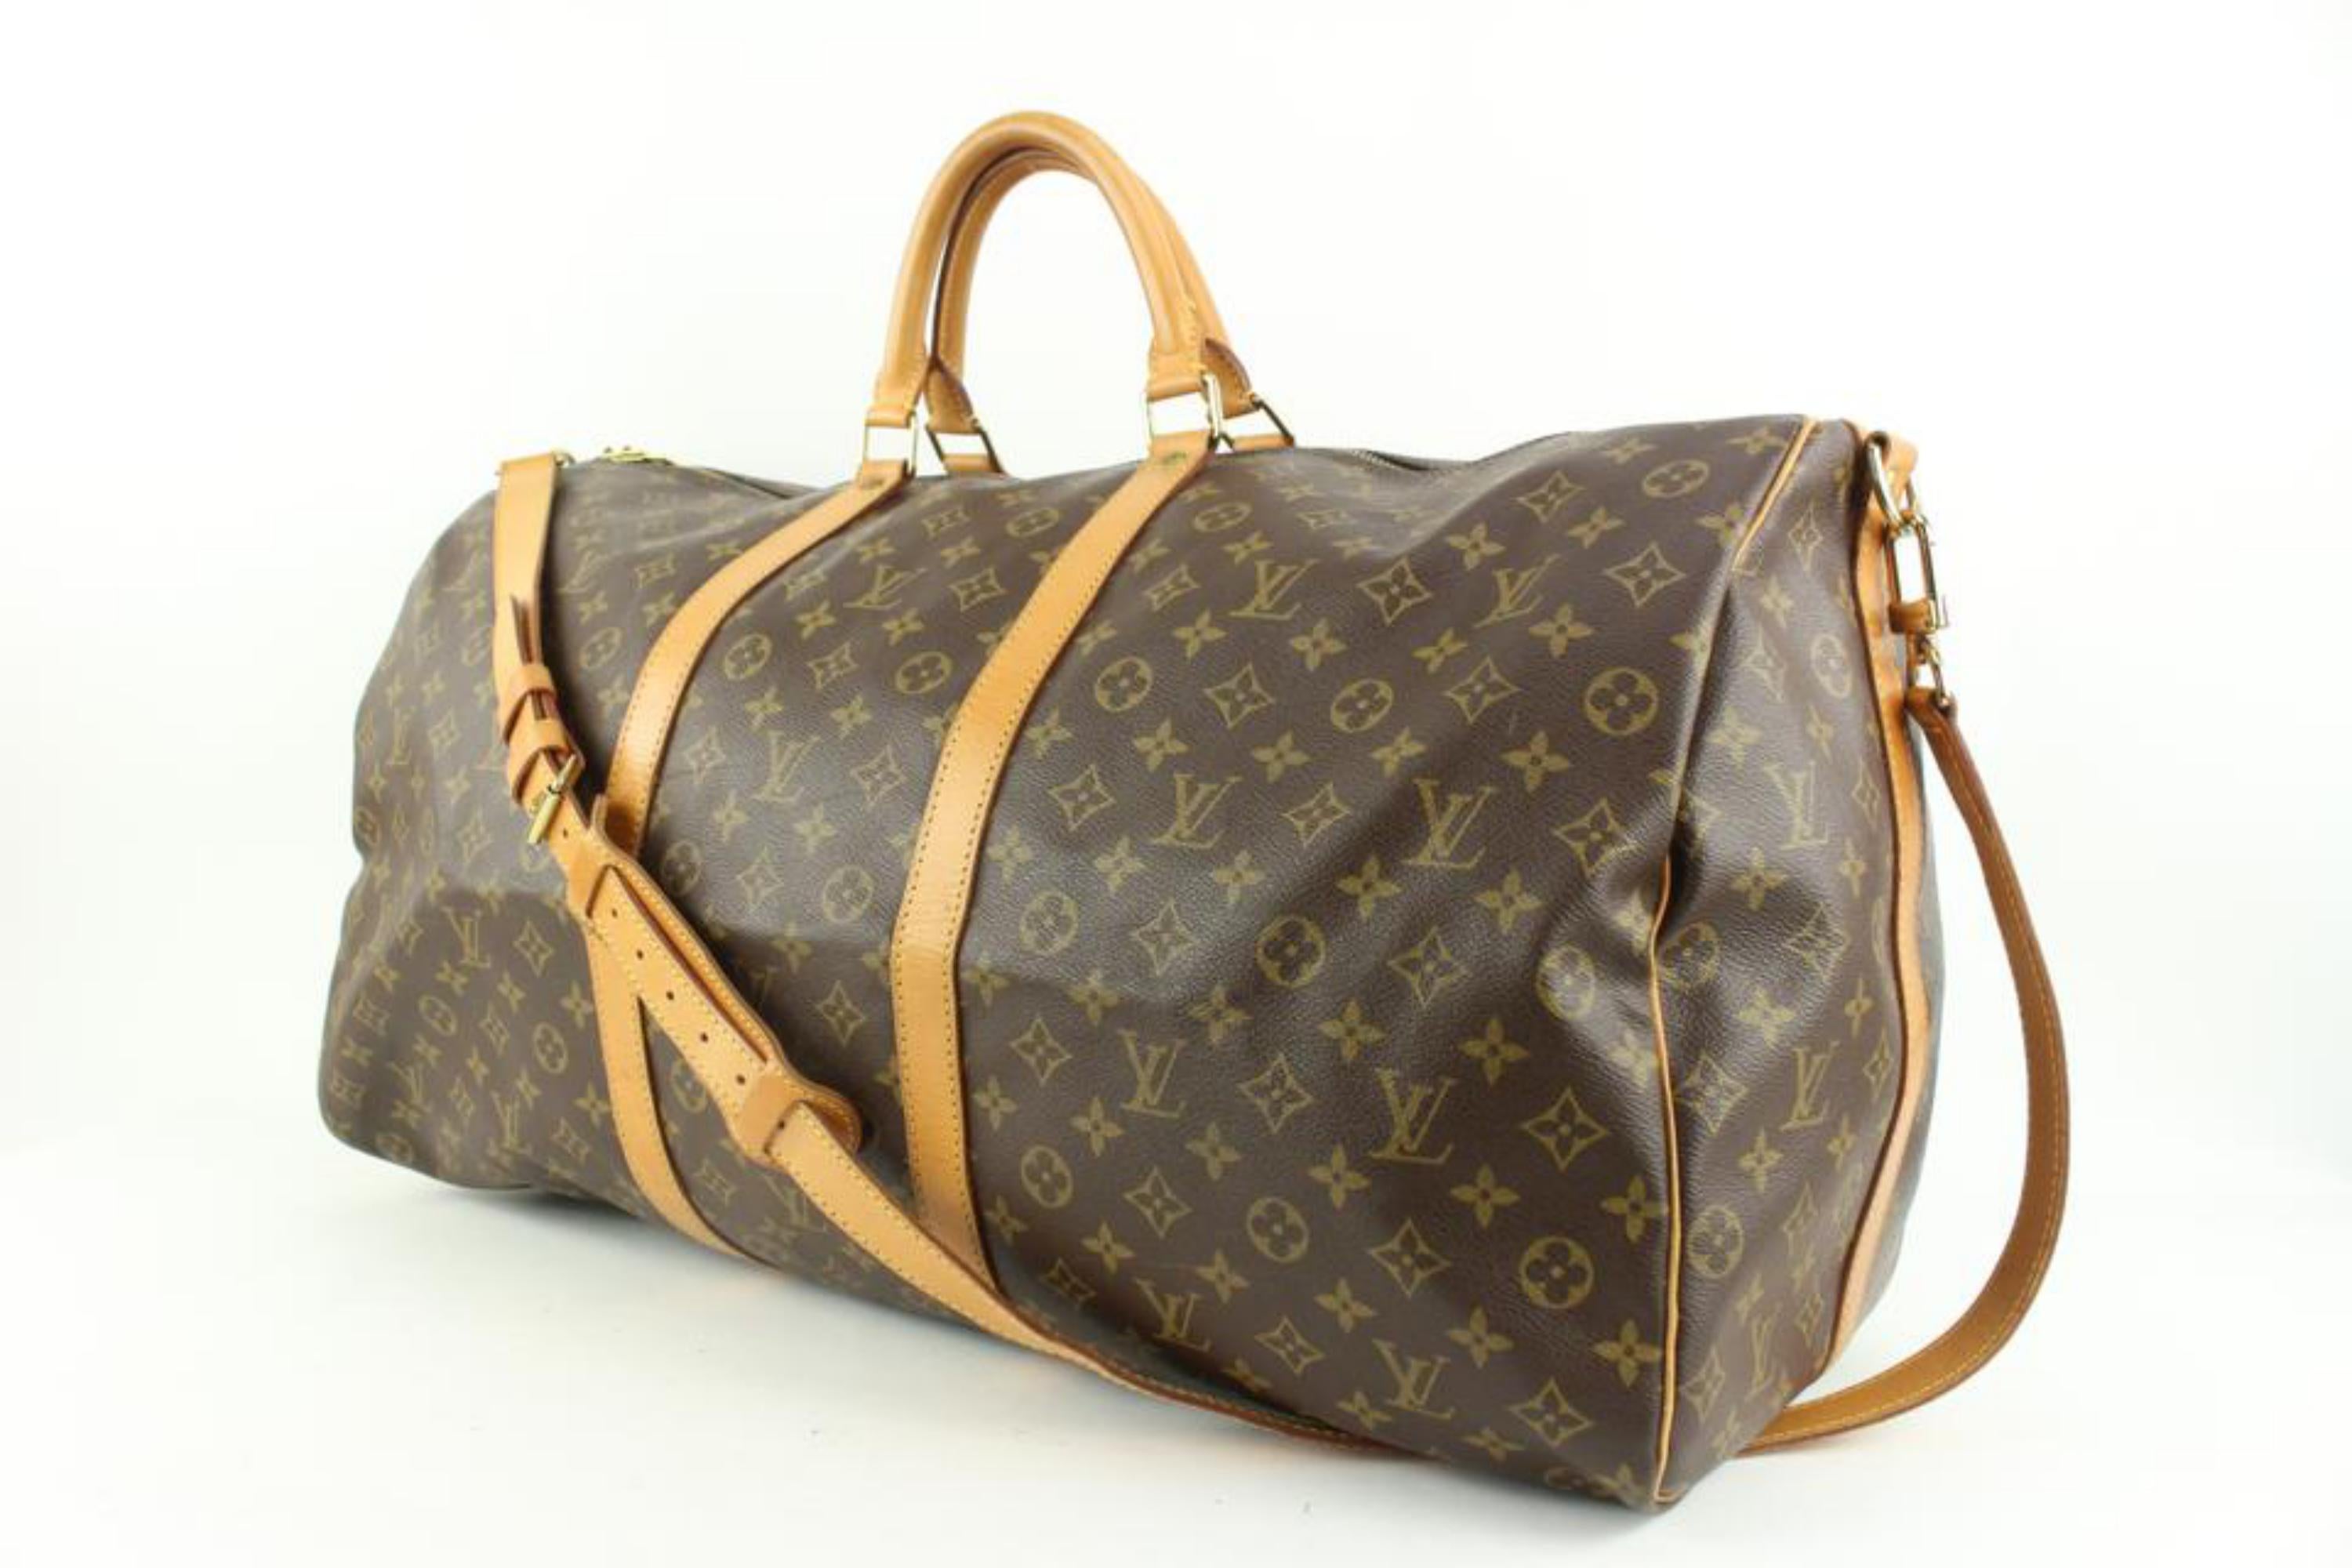 Louis Vuitton Large Monogram Keepall Bandouliere 60 Duffle with Strap 110lv55
Date Code/Serial Number: VI0954
Made In: France
Measurements: Length:  23.5